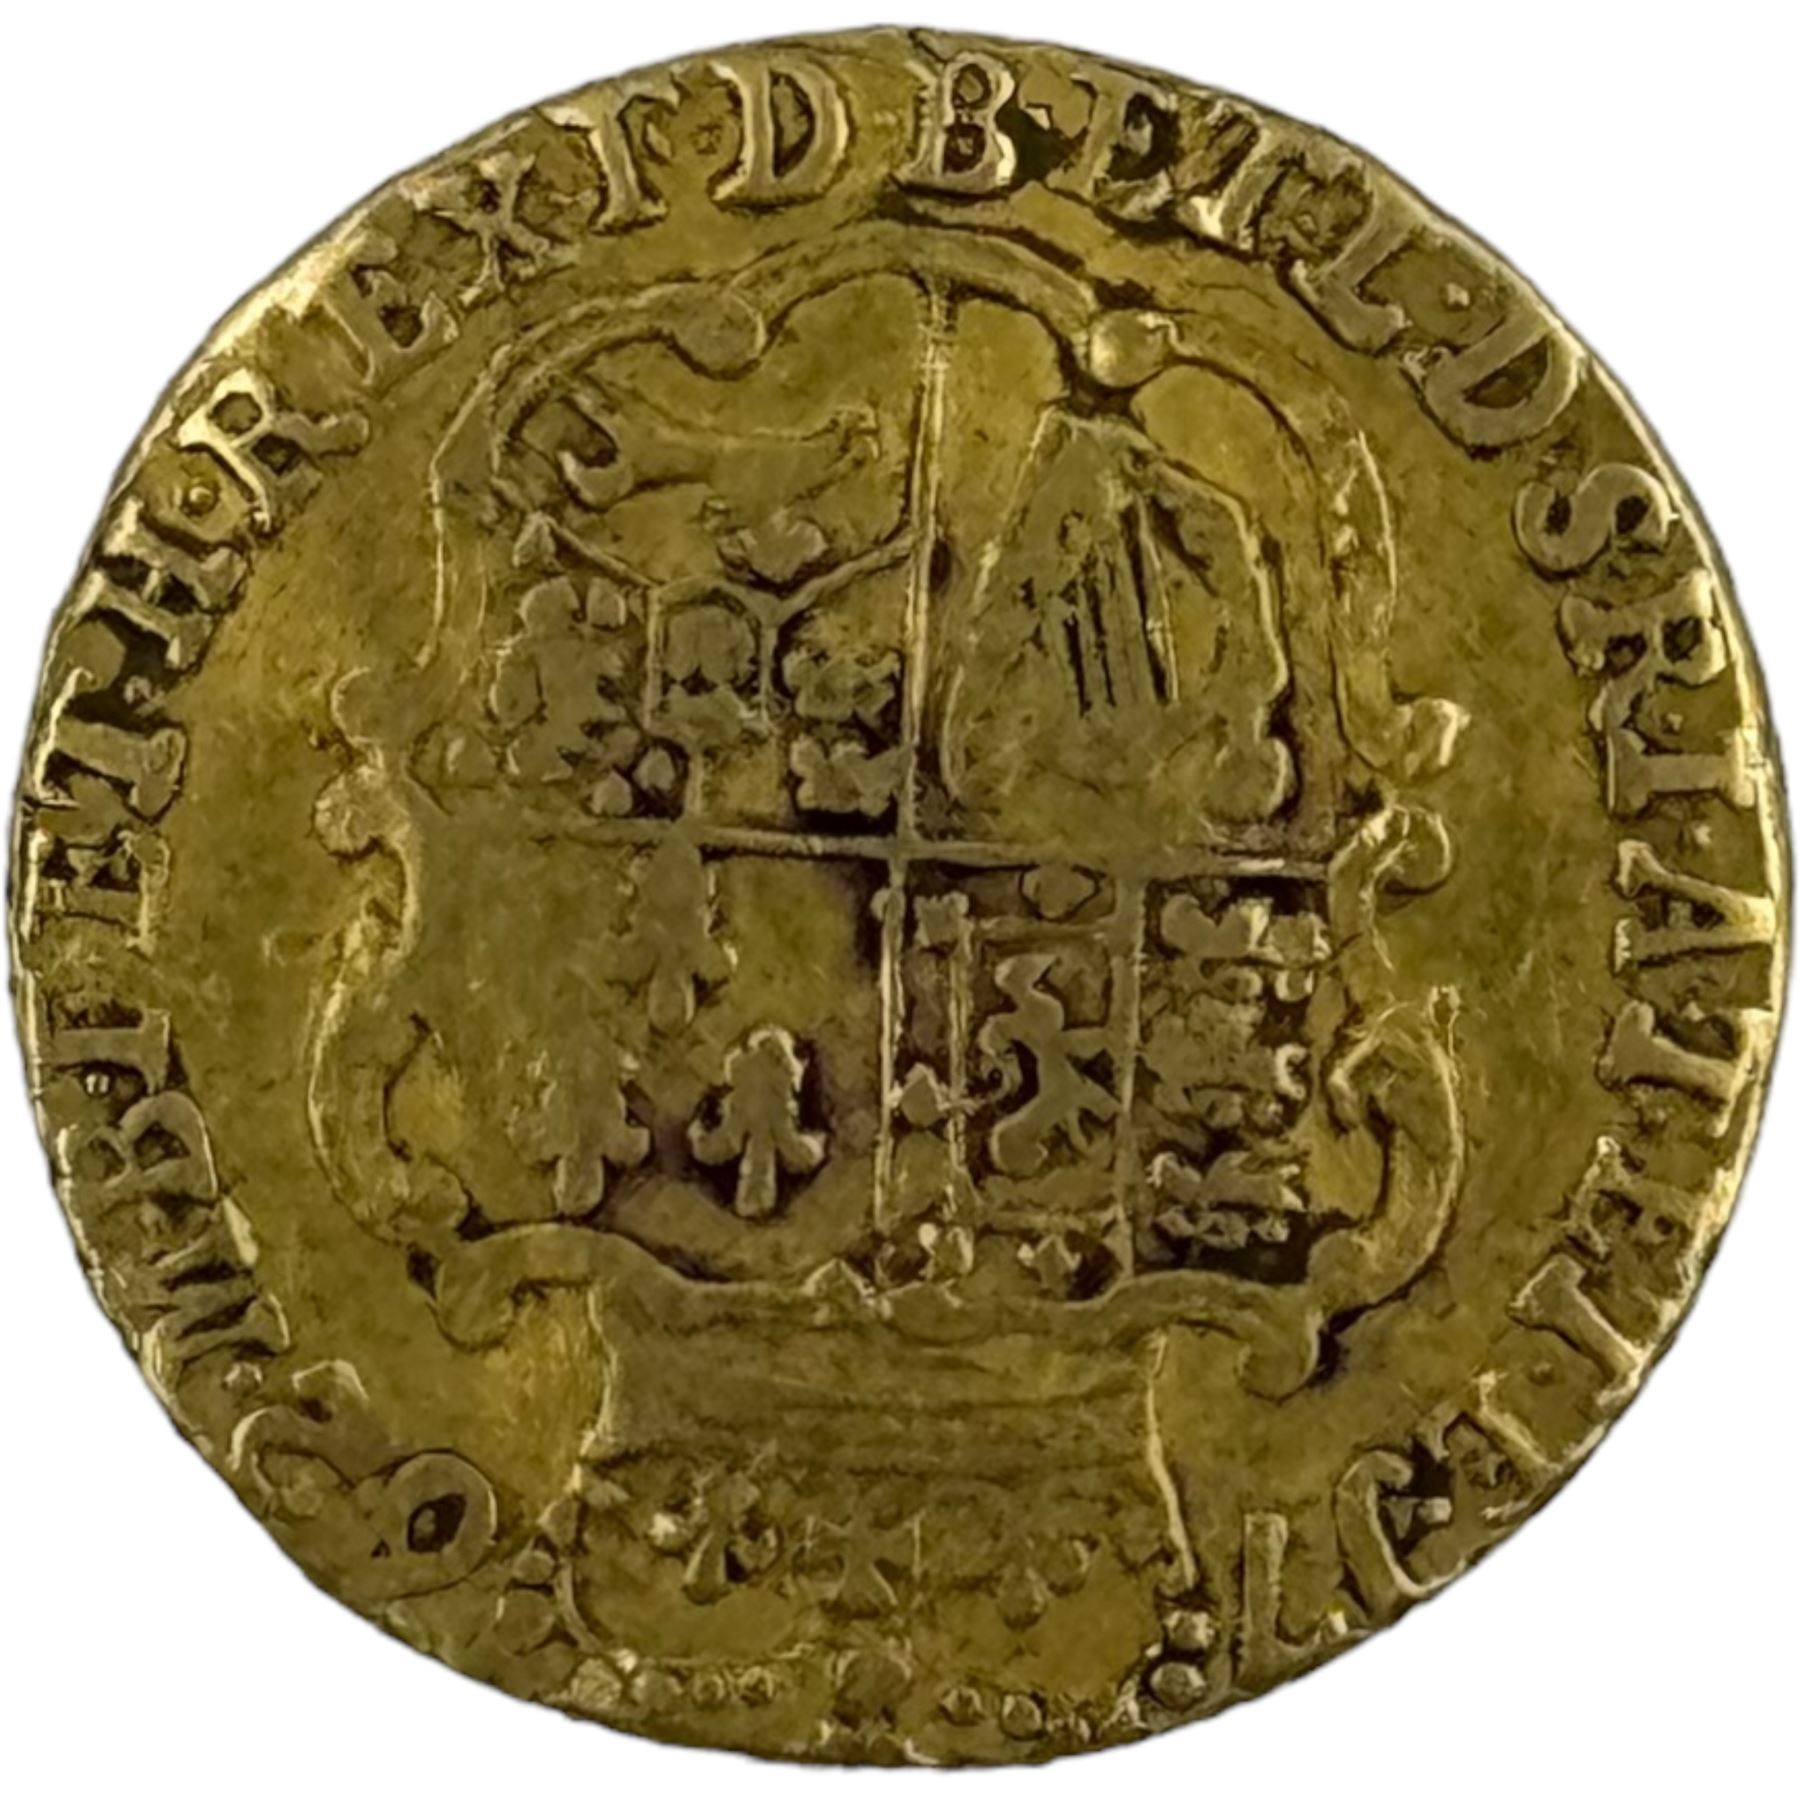 George III 1762 gold quarter guinea coin - Image 2 of 2